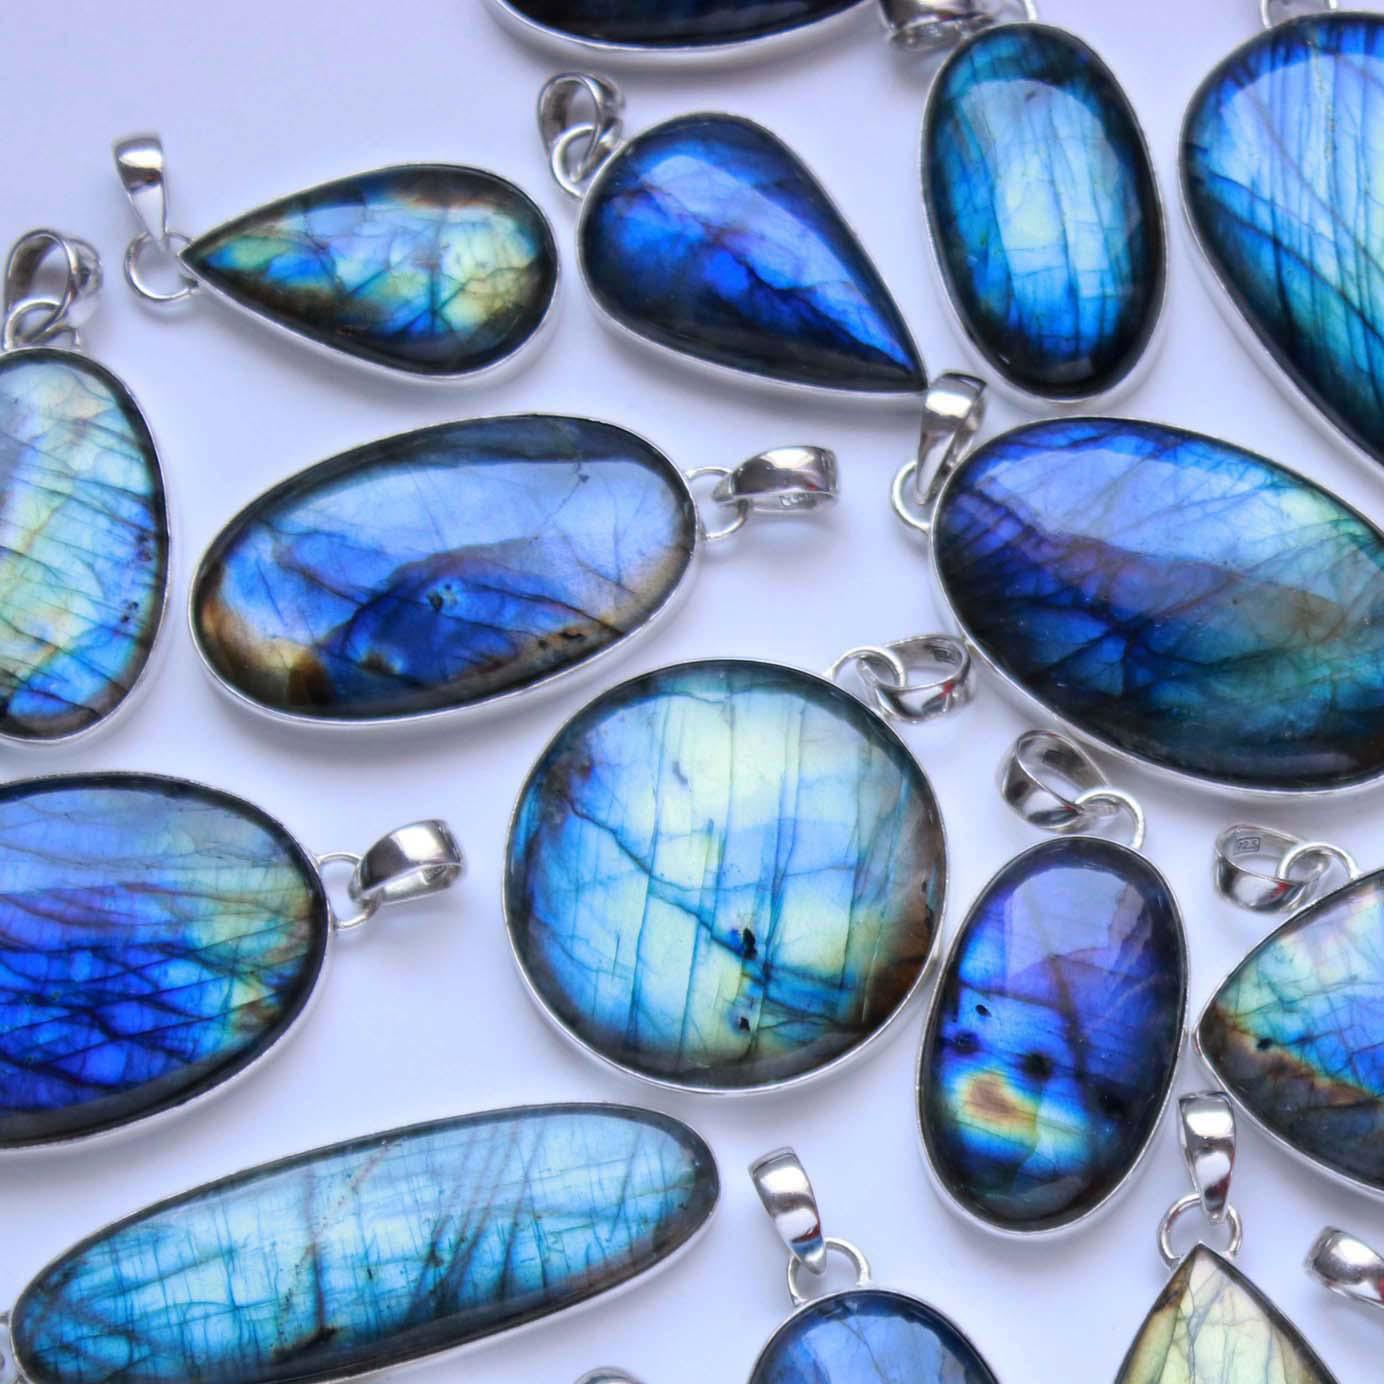 Natural labradorite 92.5 silver plated Mix cabochon gemstone pendant wholesale price Necklace Pendant For Jewelry